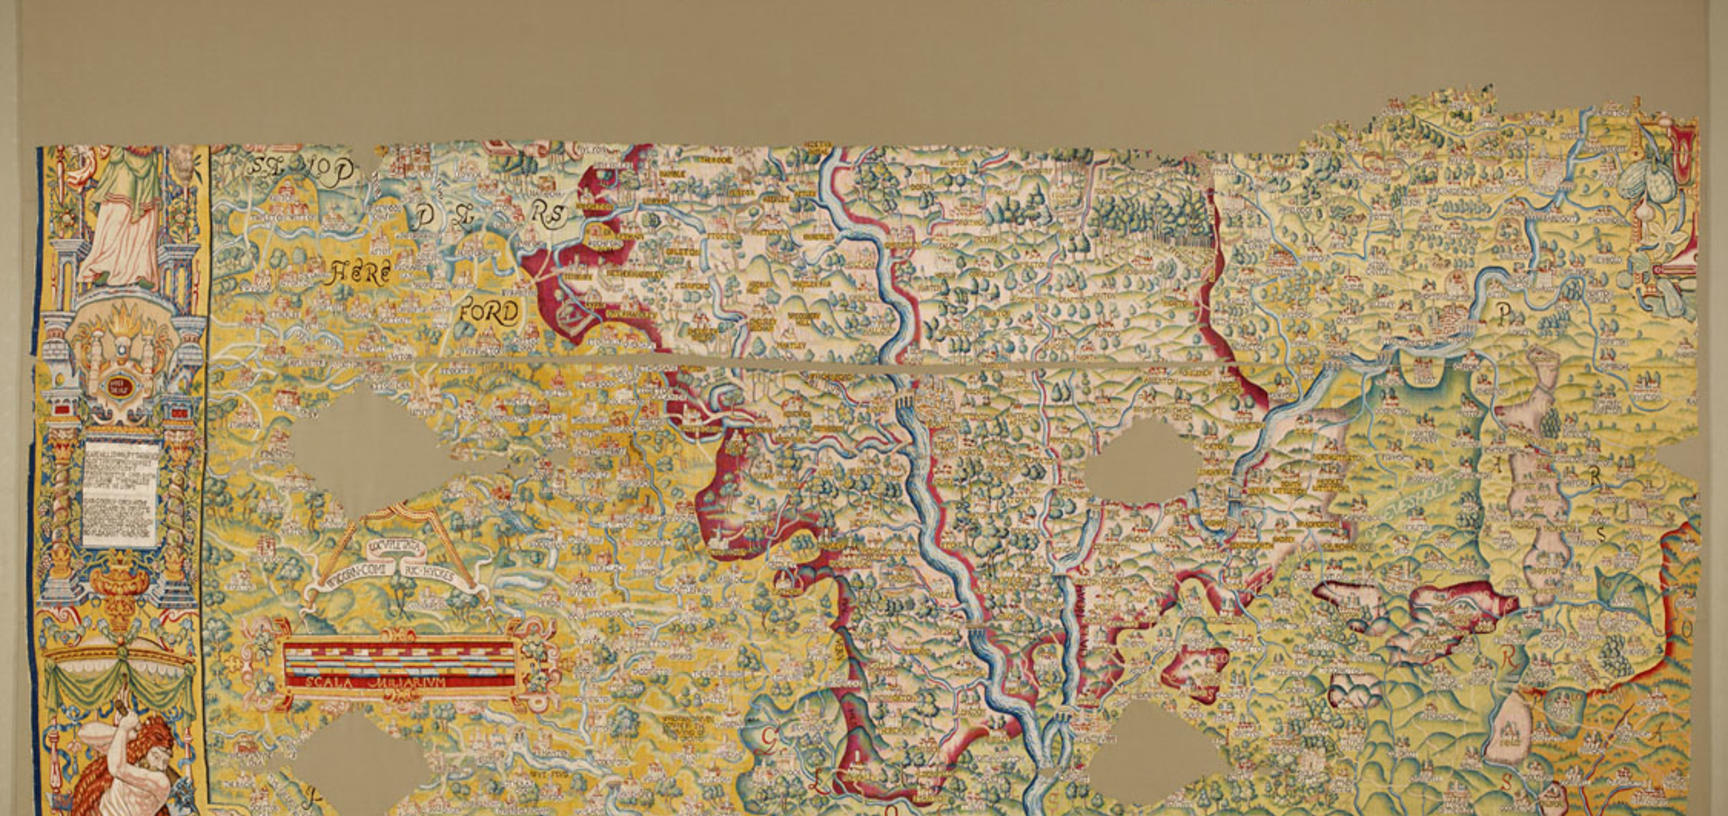 A portion of the tapestry map - showing Worcestershire - there are bright red lines showing the county boundaries and bright yellows and greens